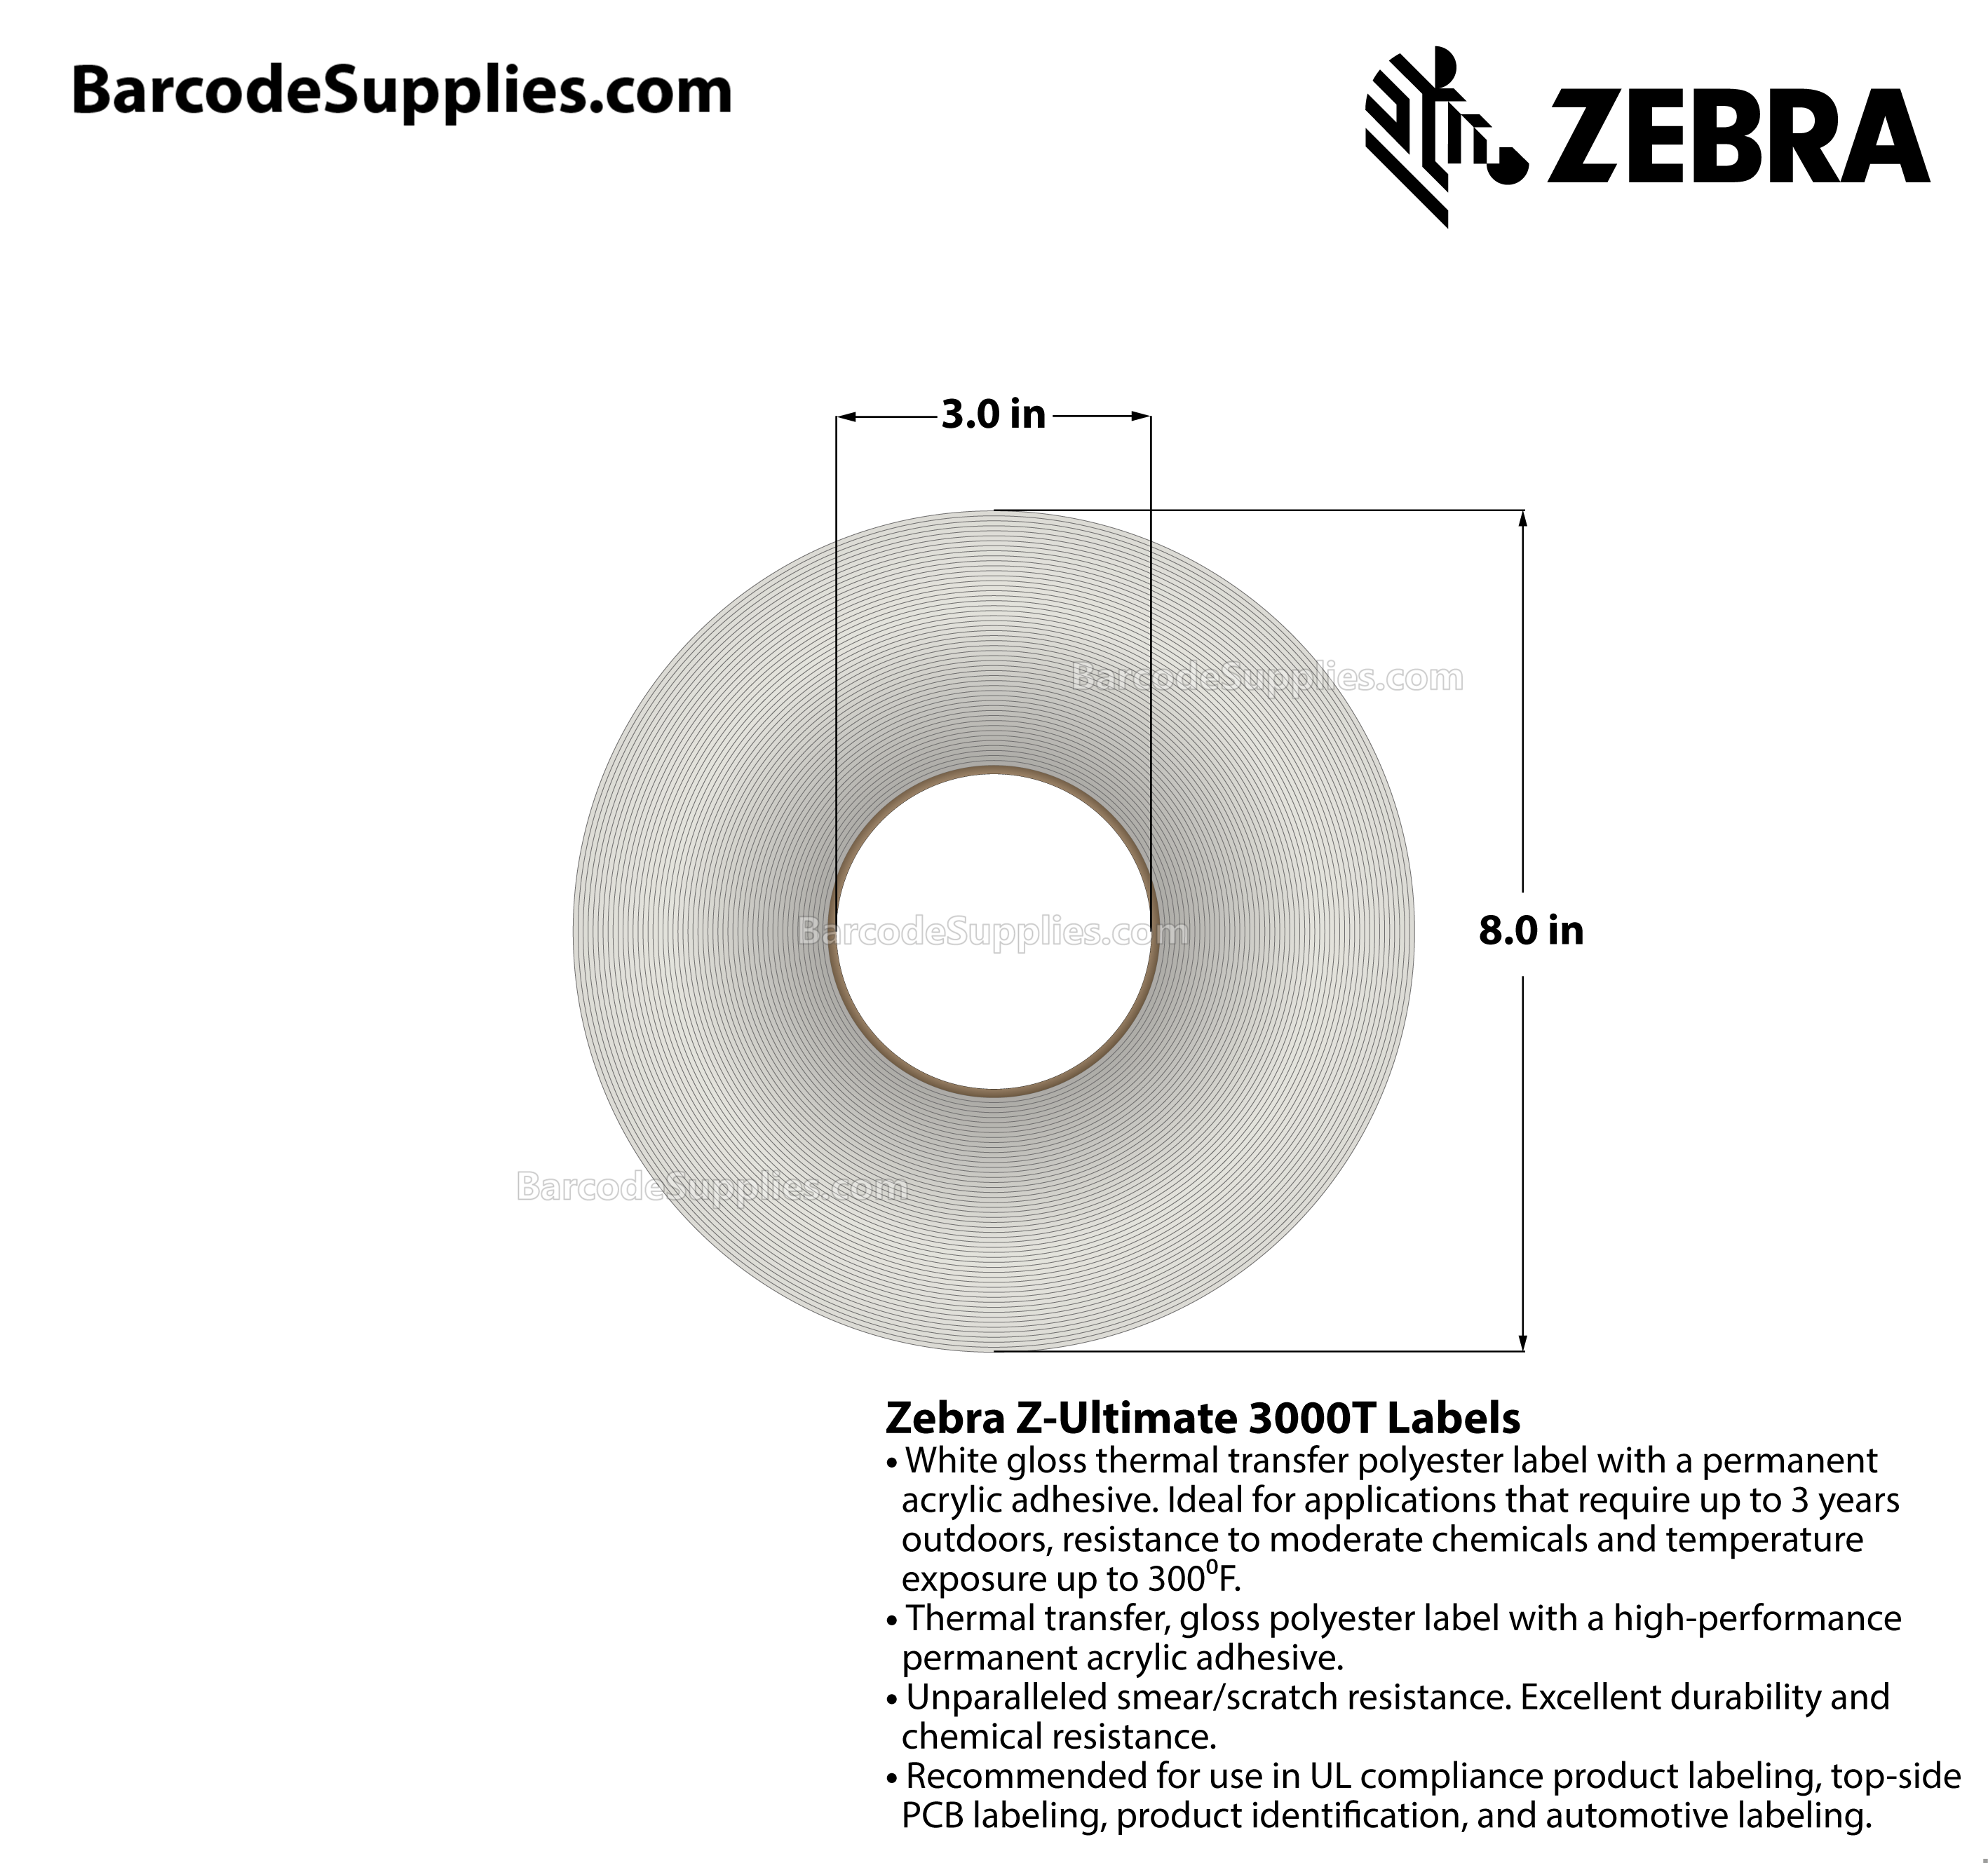 2.75 x 1.25 Thermal Transfer White Z-Ultimate 3000T Labels With Permanent Adhesive - Not Perforated - 4270 Labels Per Roll - Carton Of 4 Rolls - 17080 Labels Total - MPN: 10011701